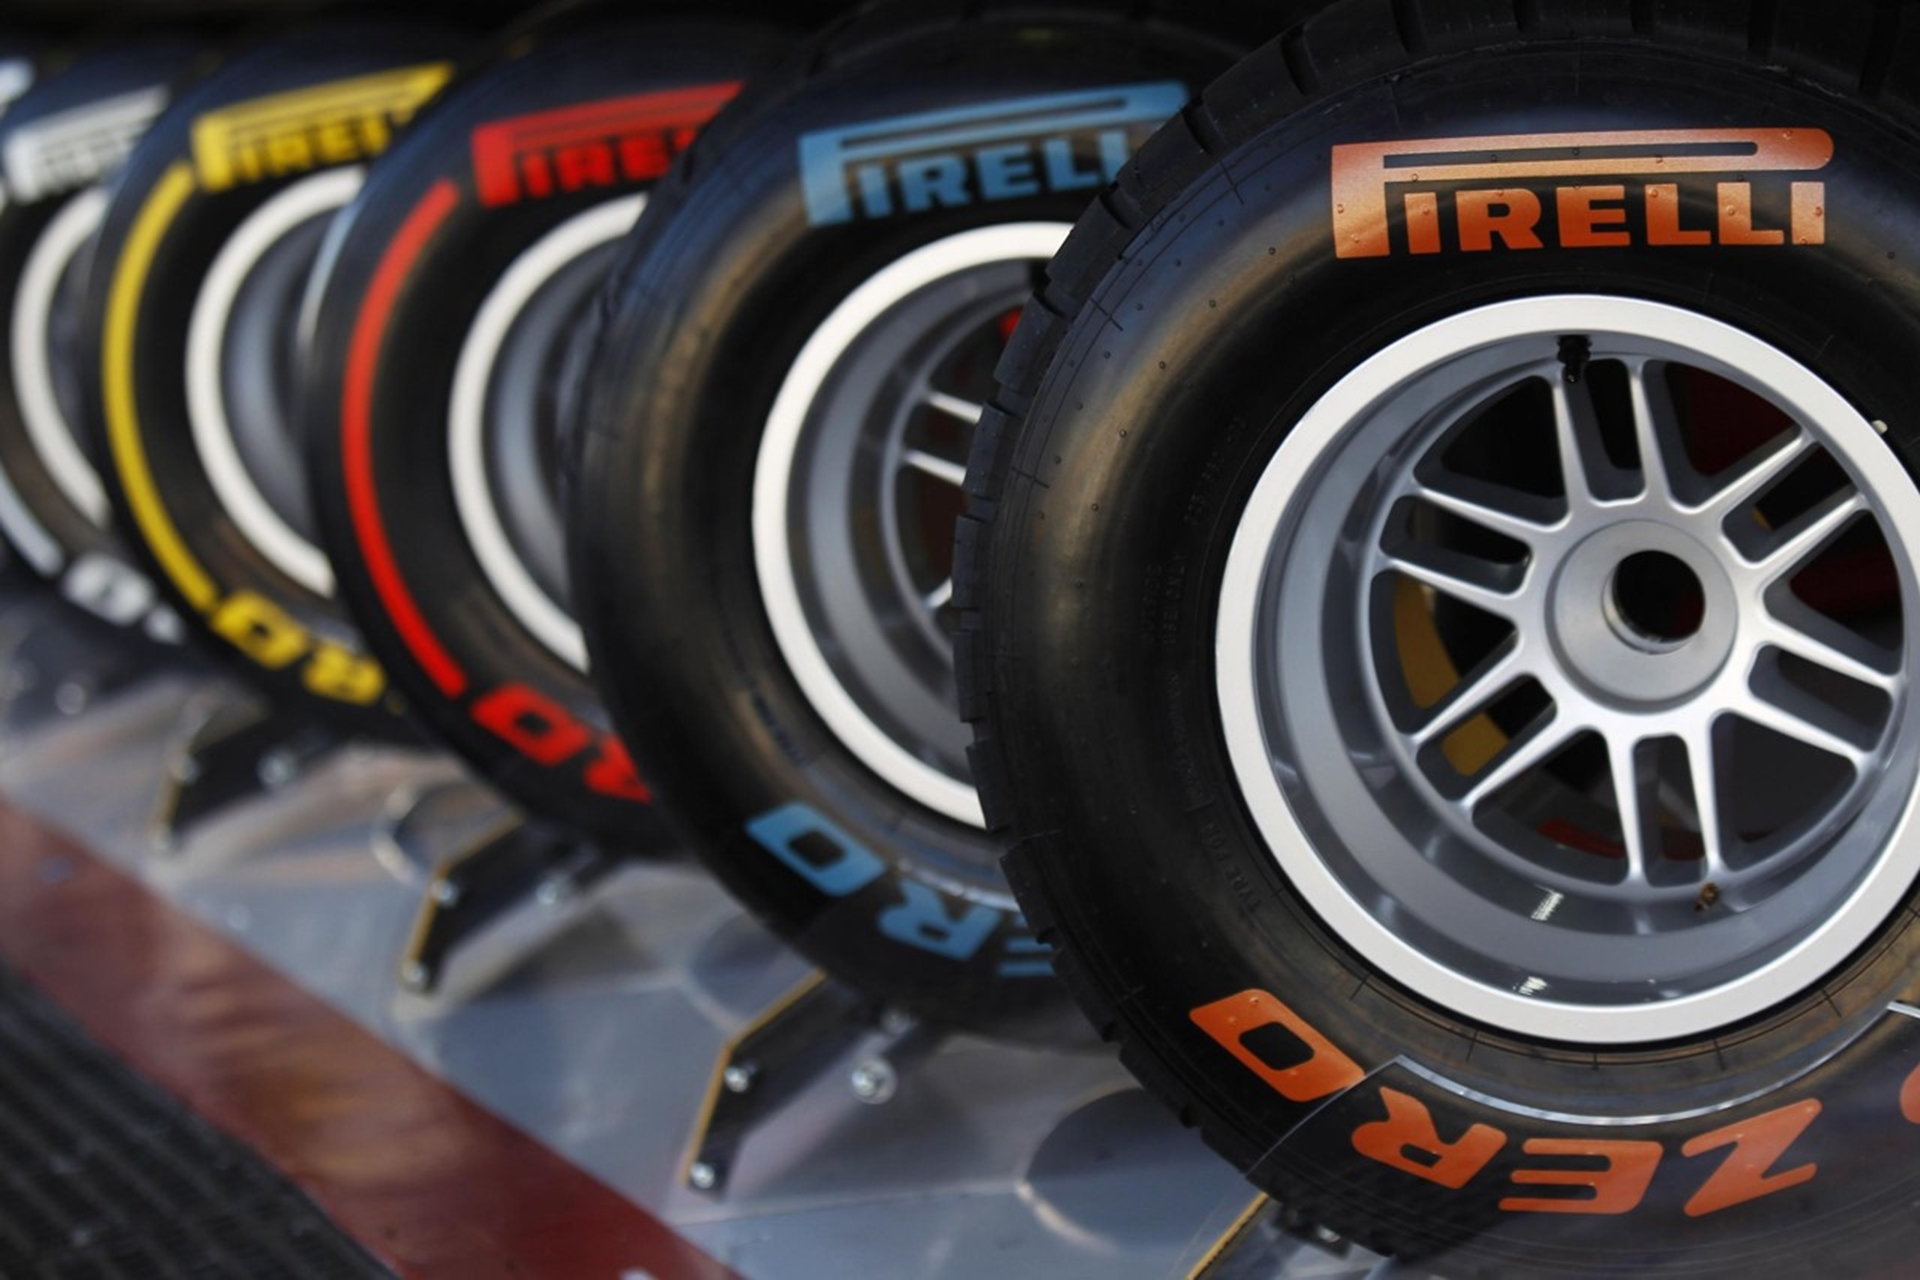 PIRELLI LENDS ITS SUPPORT TO NATIONAL MOTORSPORT WEEK